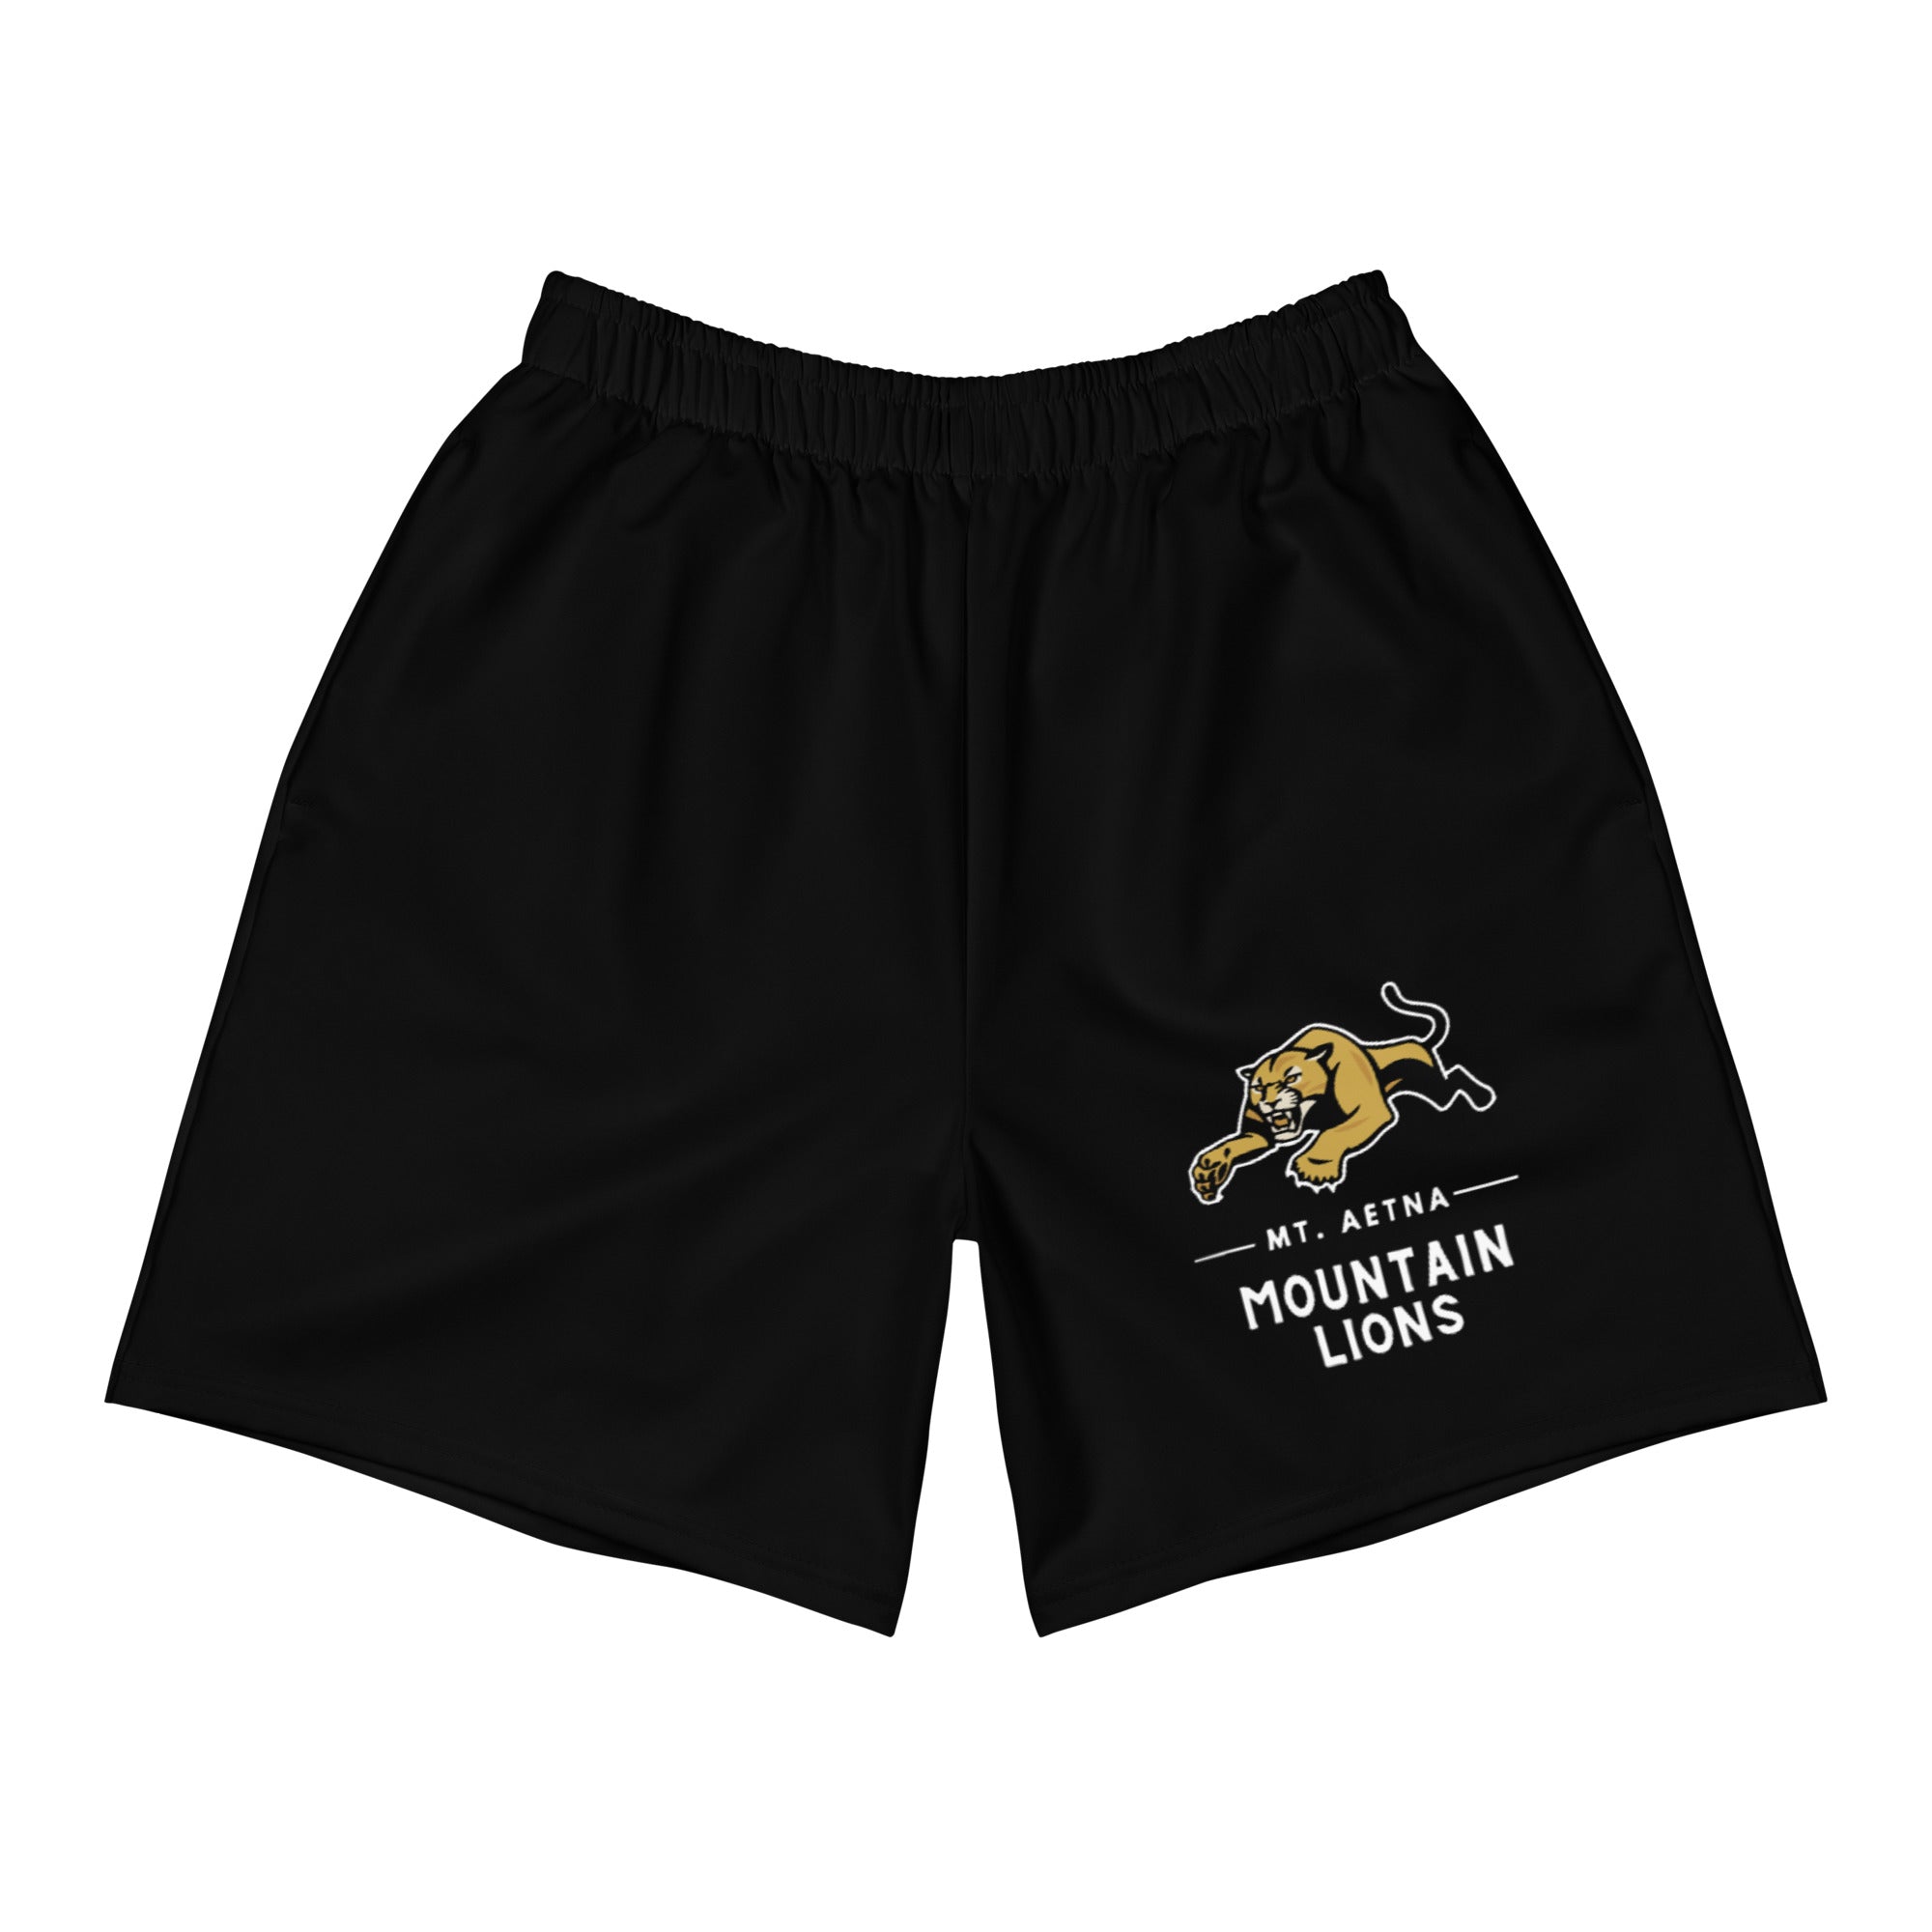 Mt. Aetna Men's Recycled Athletic Shorts